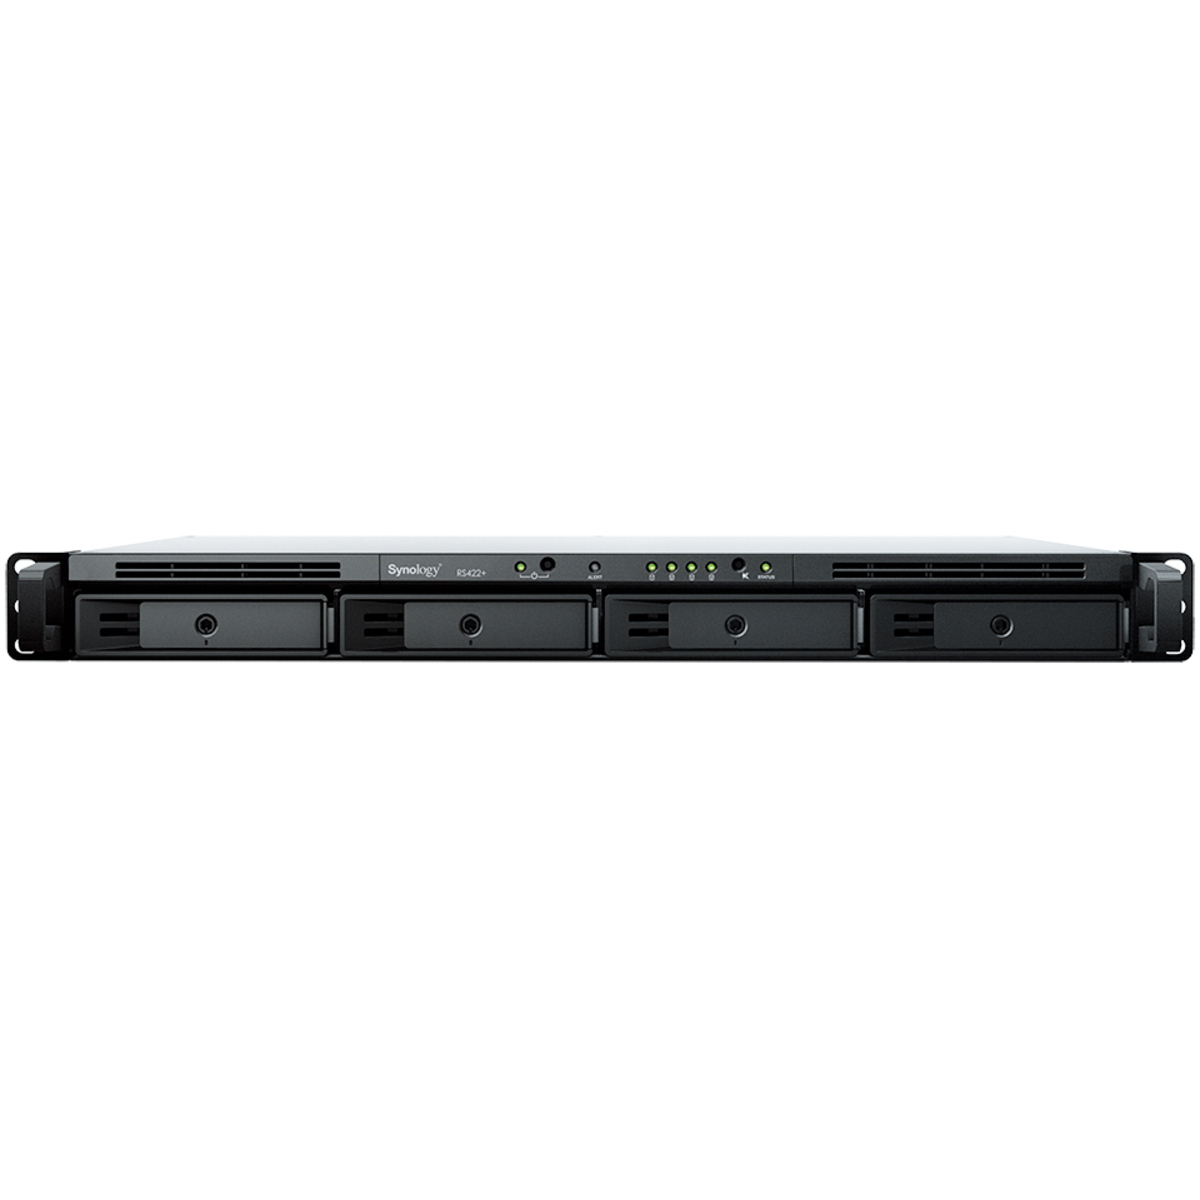 Synology RackStation RS422+ 32tb 4-Bay RackMount Personal / Basic Home / Small Office NAS - Network Attached Storage Device 4x8tb Seagate IronWolf Pro ST8000NT001 3.5 7200rpm SATA 6Gb/s HDD NAS Class Drives Installed - Burn-In Tested - ON SALE RackStation RS422+